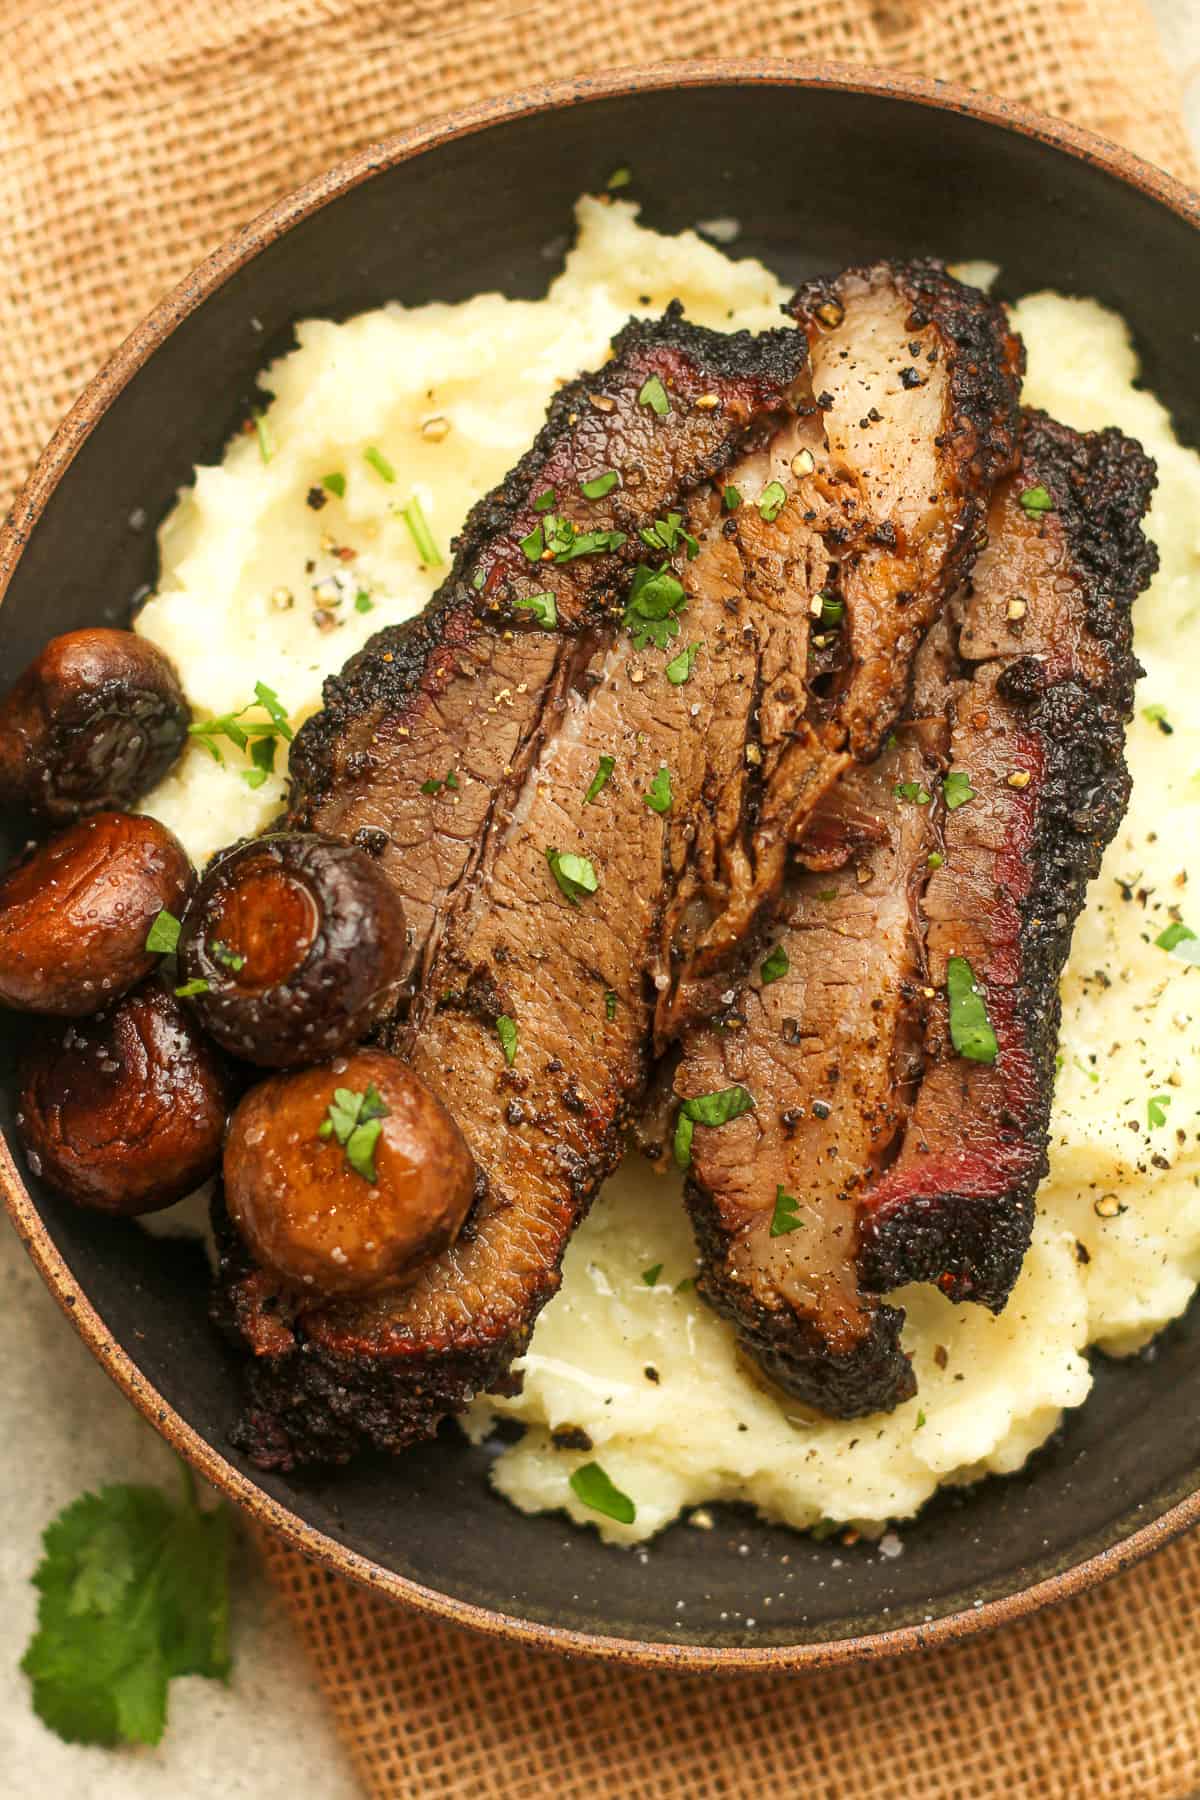 Closeup on a bowl of potatoes and smoked beef brisket.